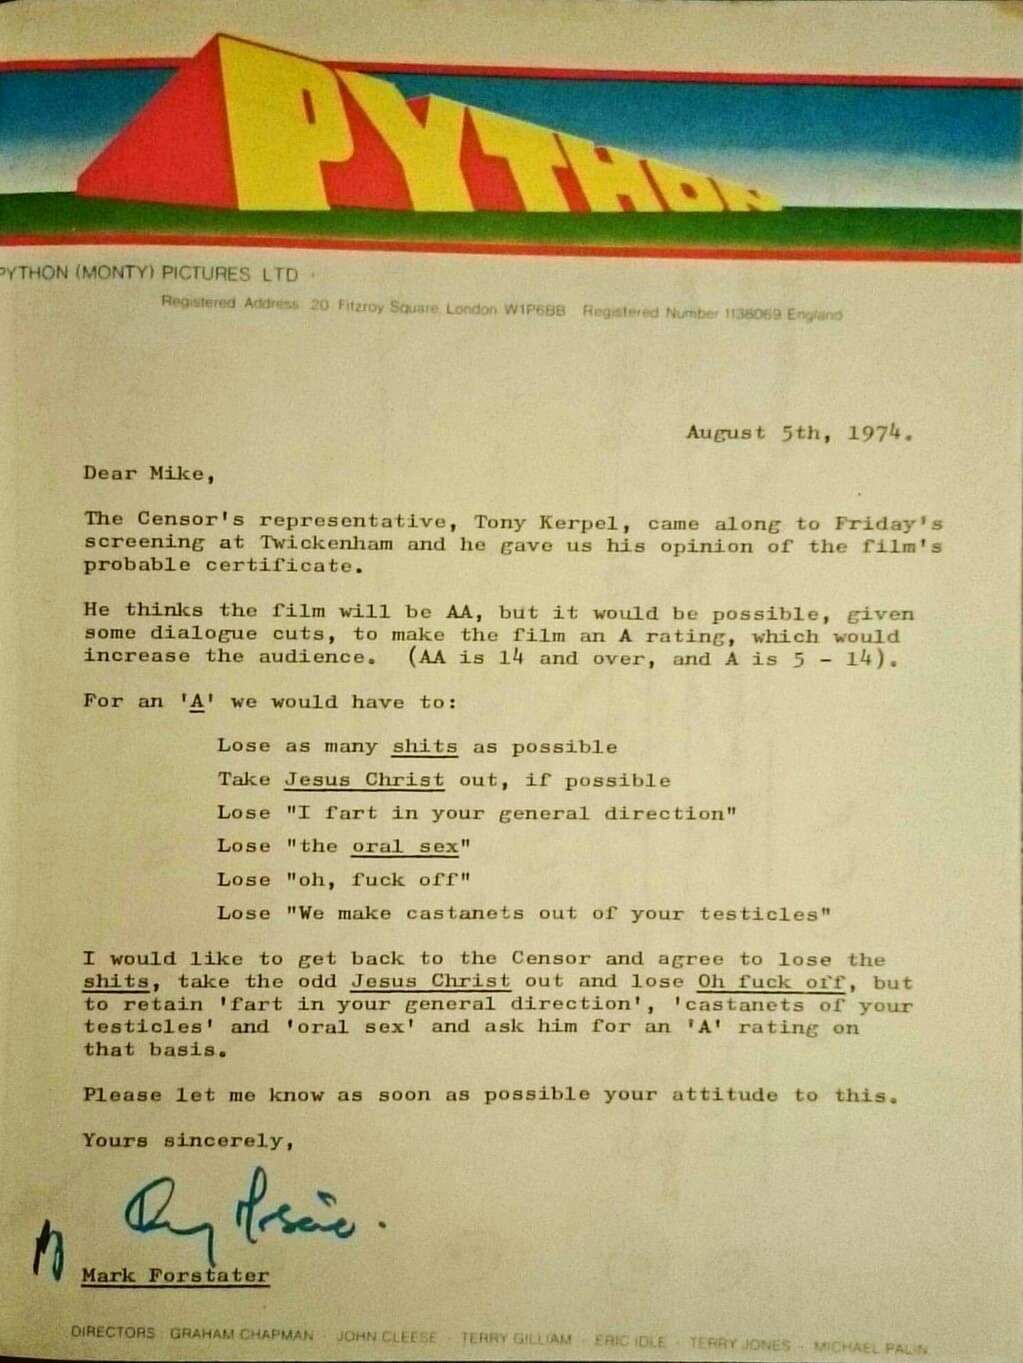 The hilarious censor negotiation letter from Monthy Python and the Holy Grail.